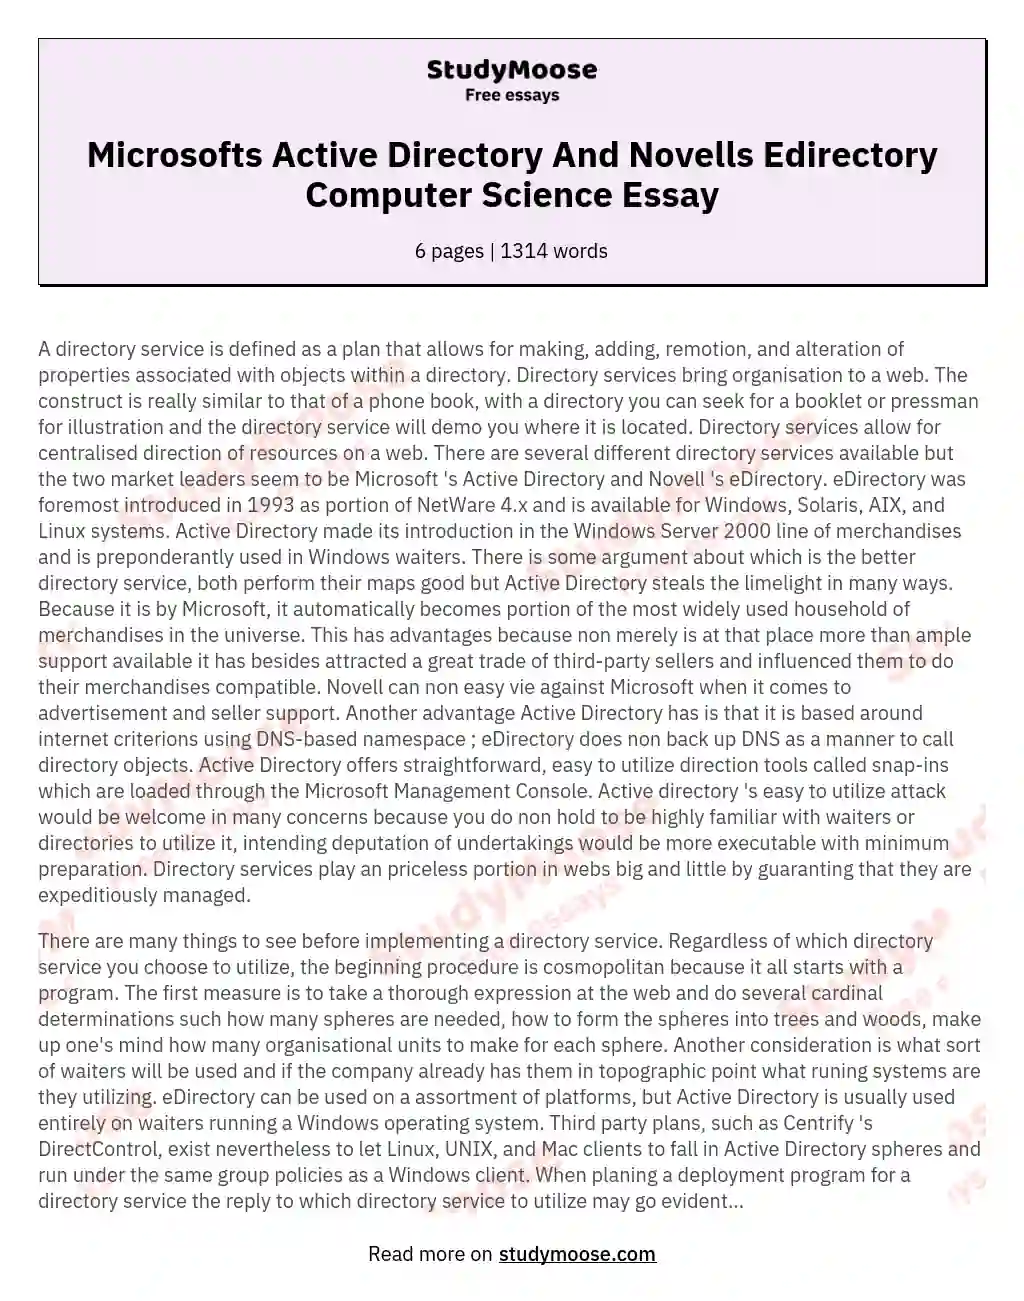 Microsofts Active Directory And Novells Edirectory Computer Science Essay